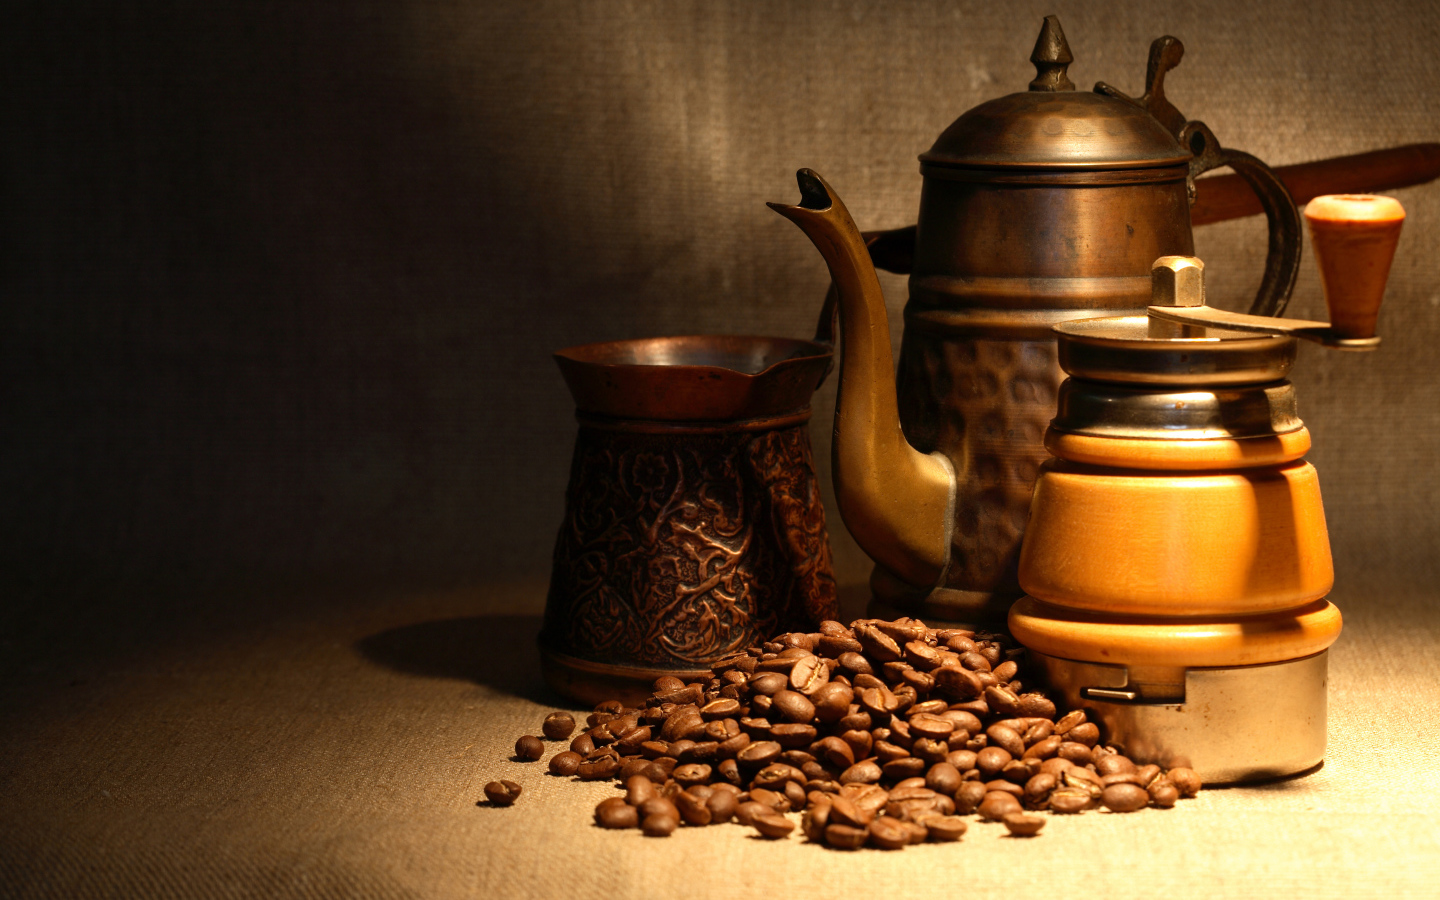 Coffee grinder, Turk, kettle and coffee beans on the table